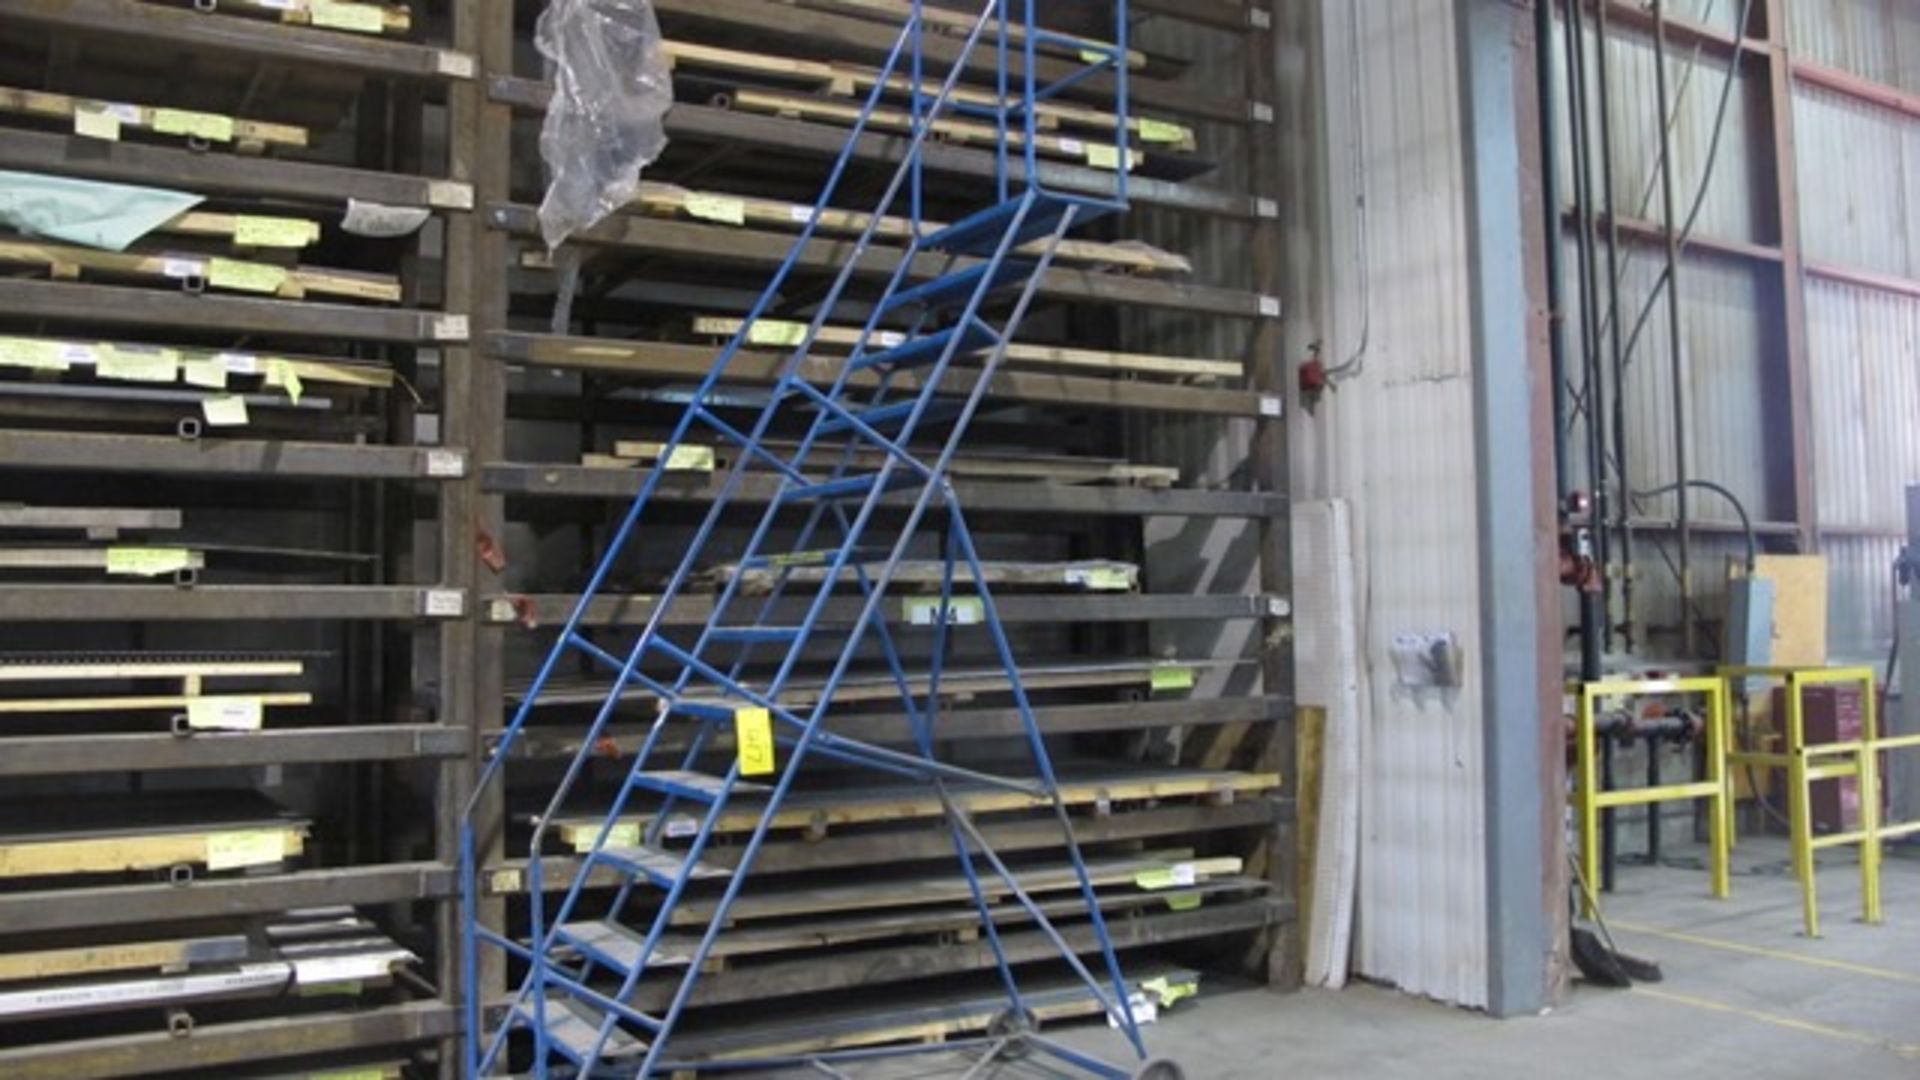 13 STEP WAREHOUSE STAIR CASE